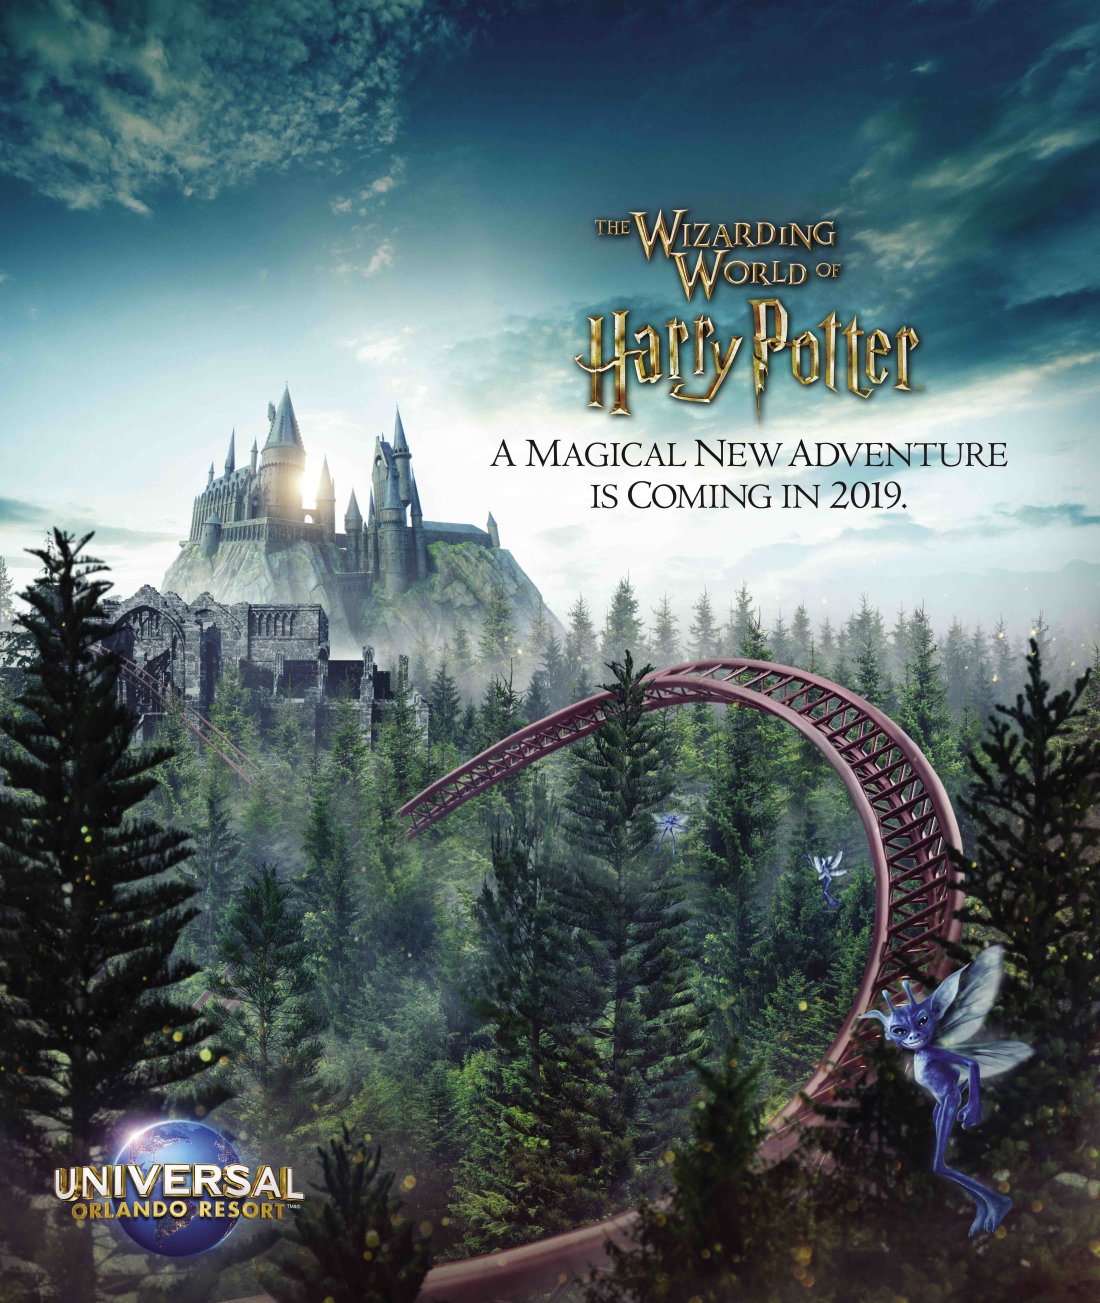 Universal_Orlando_Resort_Shares_First_Glimpse_of_New_Coaster_Experience_Coming_to_The_Wizarding_World_of_Harry_Potter_in_201.jpg